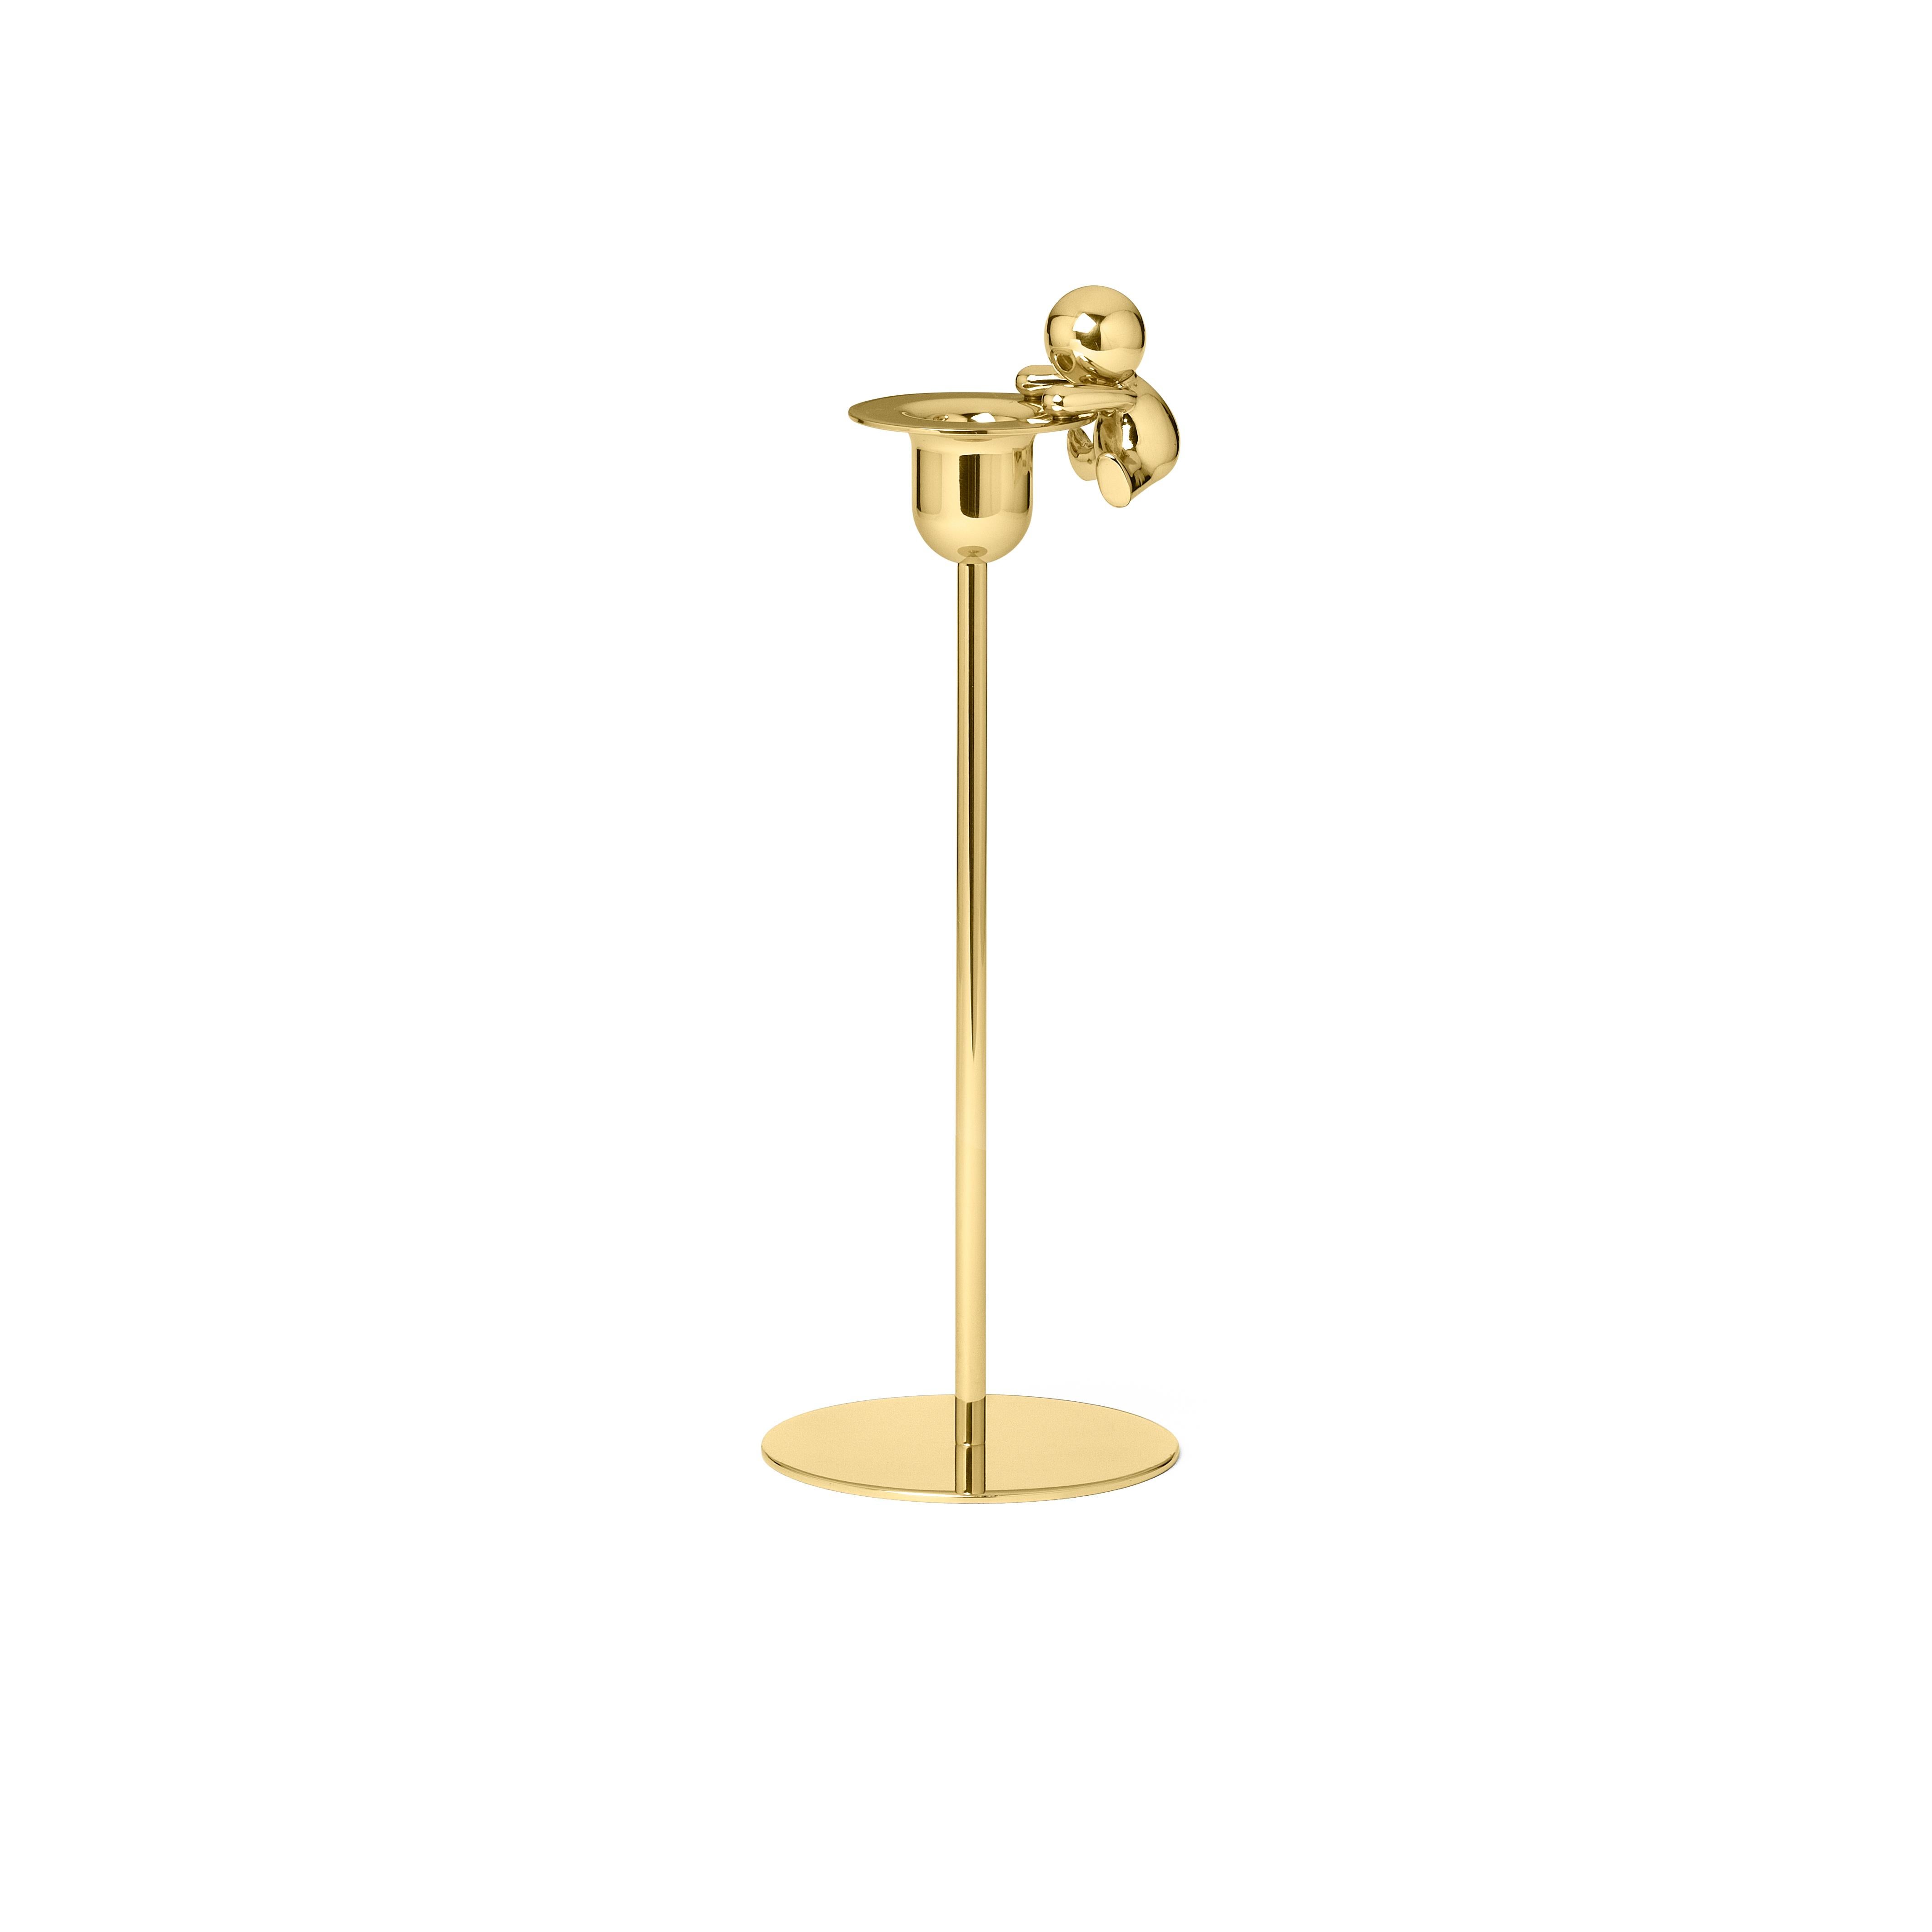 Candleholder in brass
Omini is a family of products that plays on the inclusion and the relationship between the human figure with a series of monolithic objects from geometric and Minimalist design. Small Lilliputians attack and animate the pure